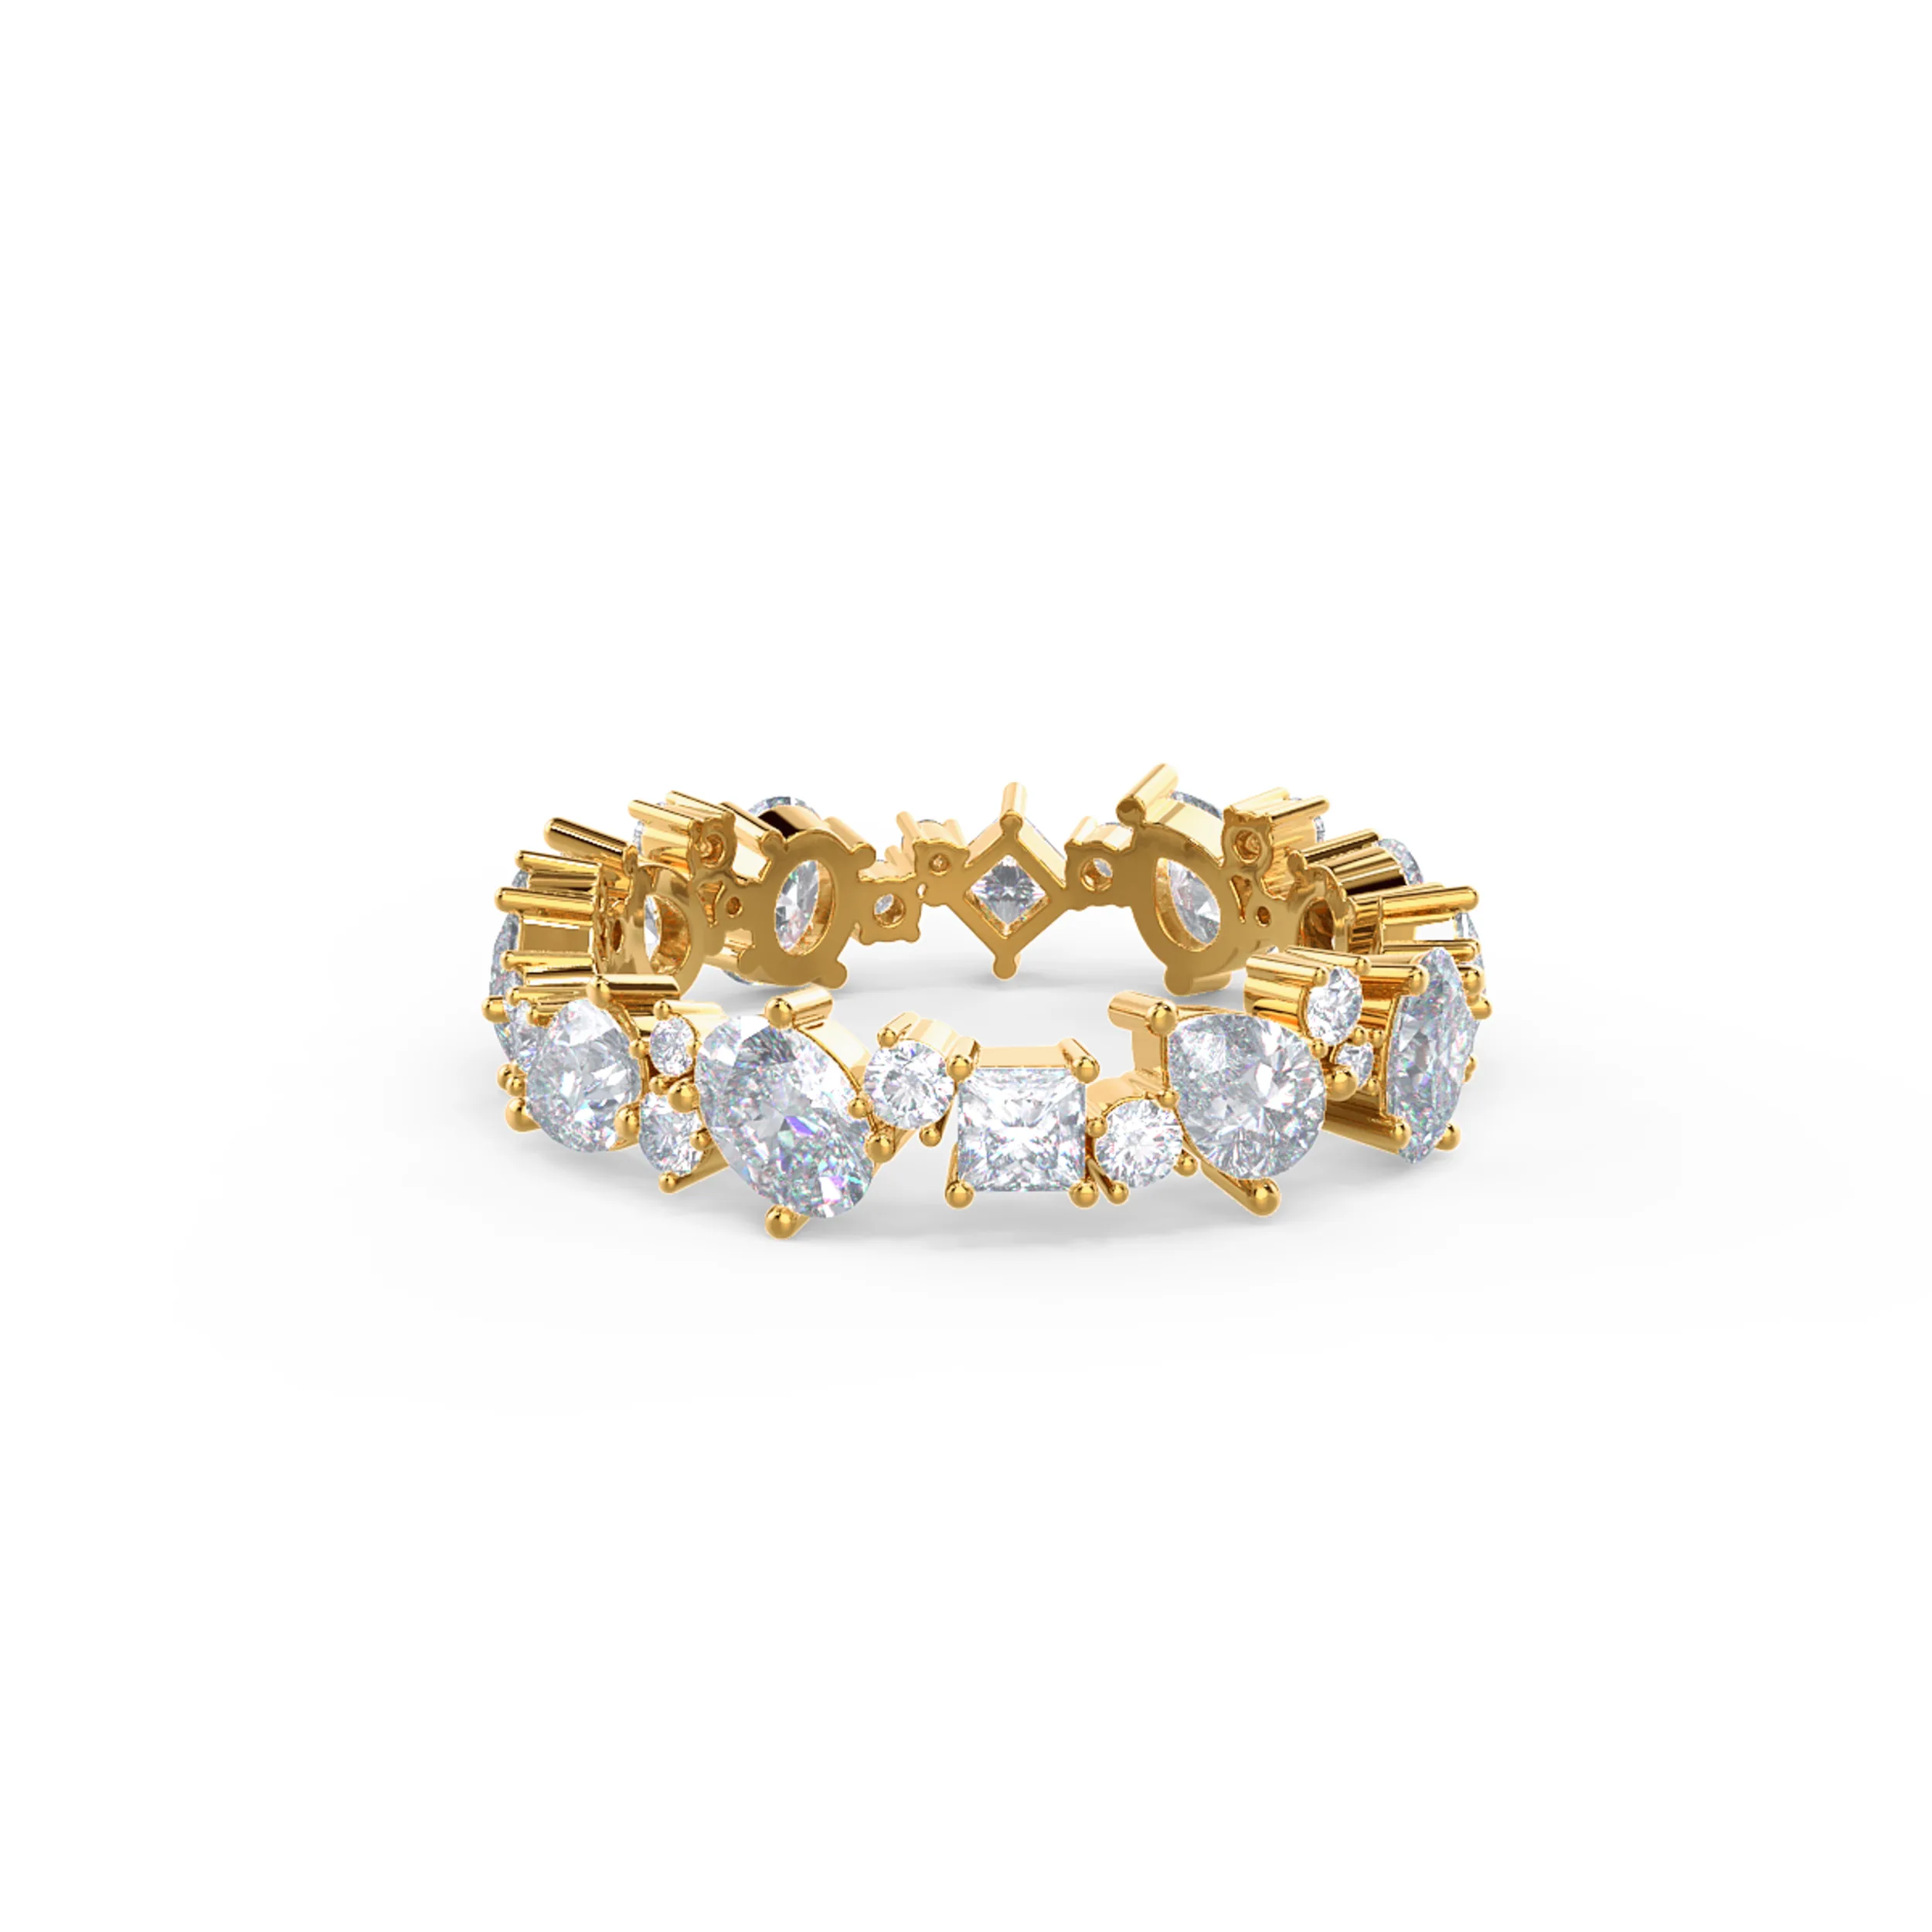 18k Yellow Gold Kelsey Eternity Band featuring Hand Selected 2.0 Carat Diamonds (Main View)